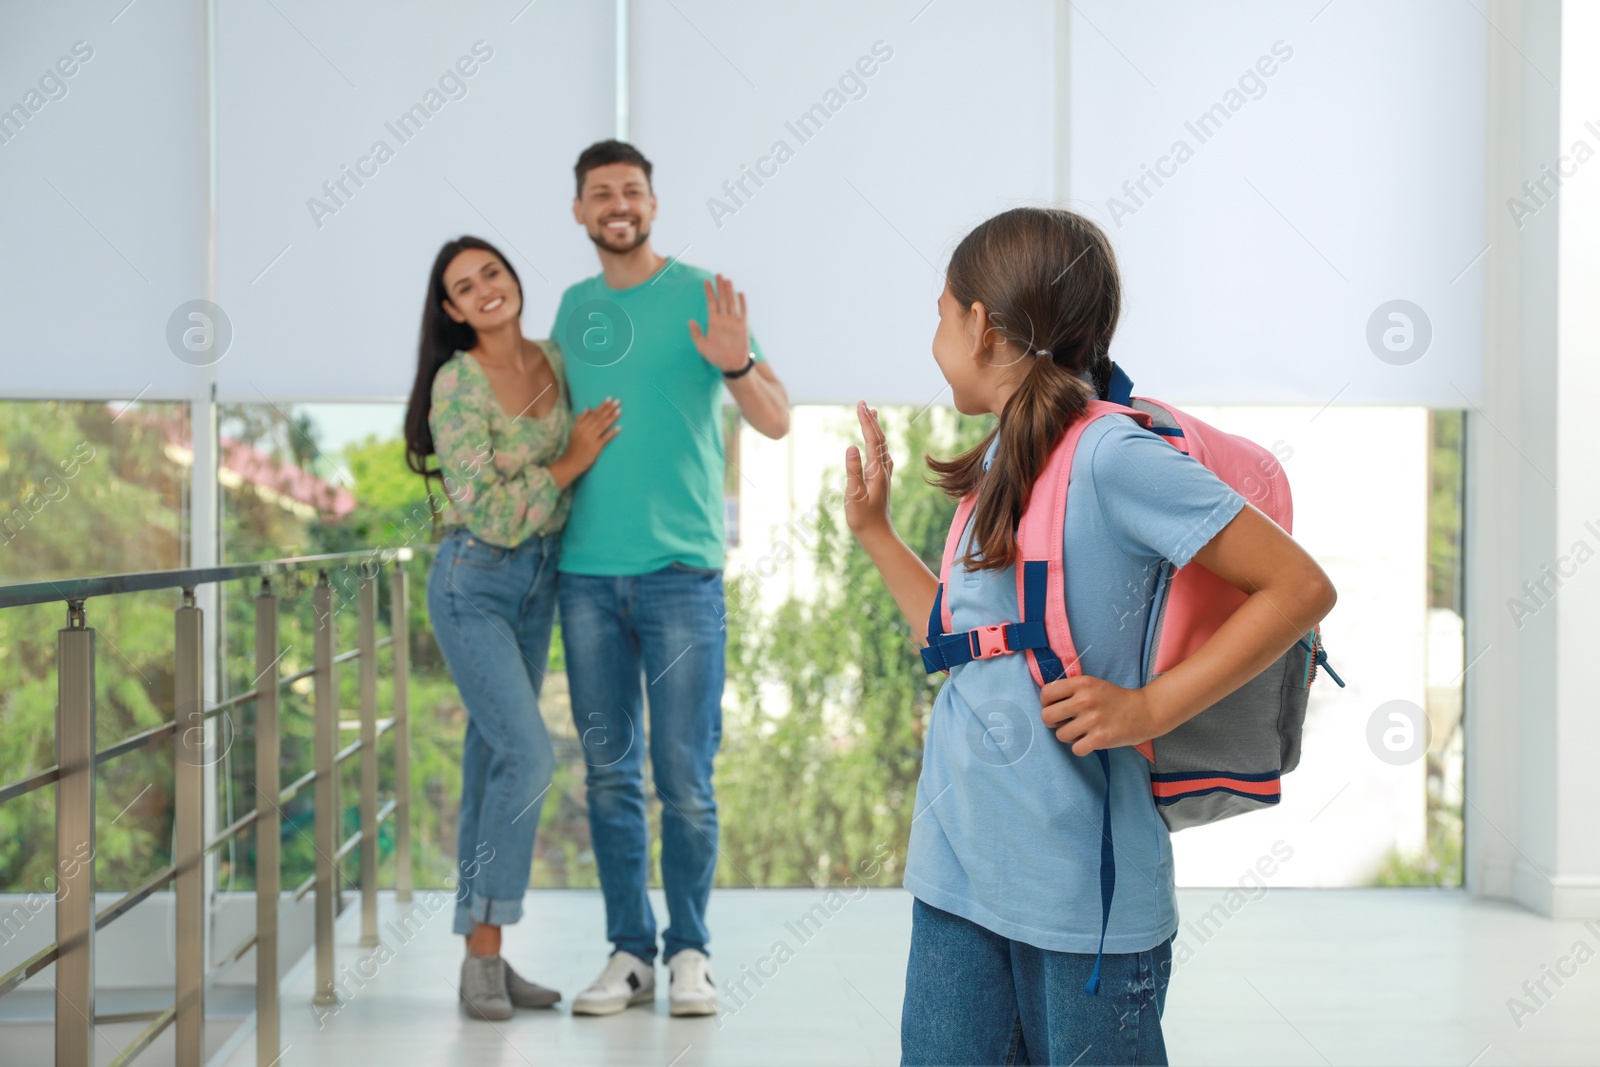 Photo of Parents waving goodbye to their daughter in school